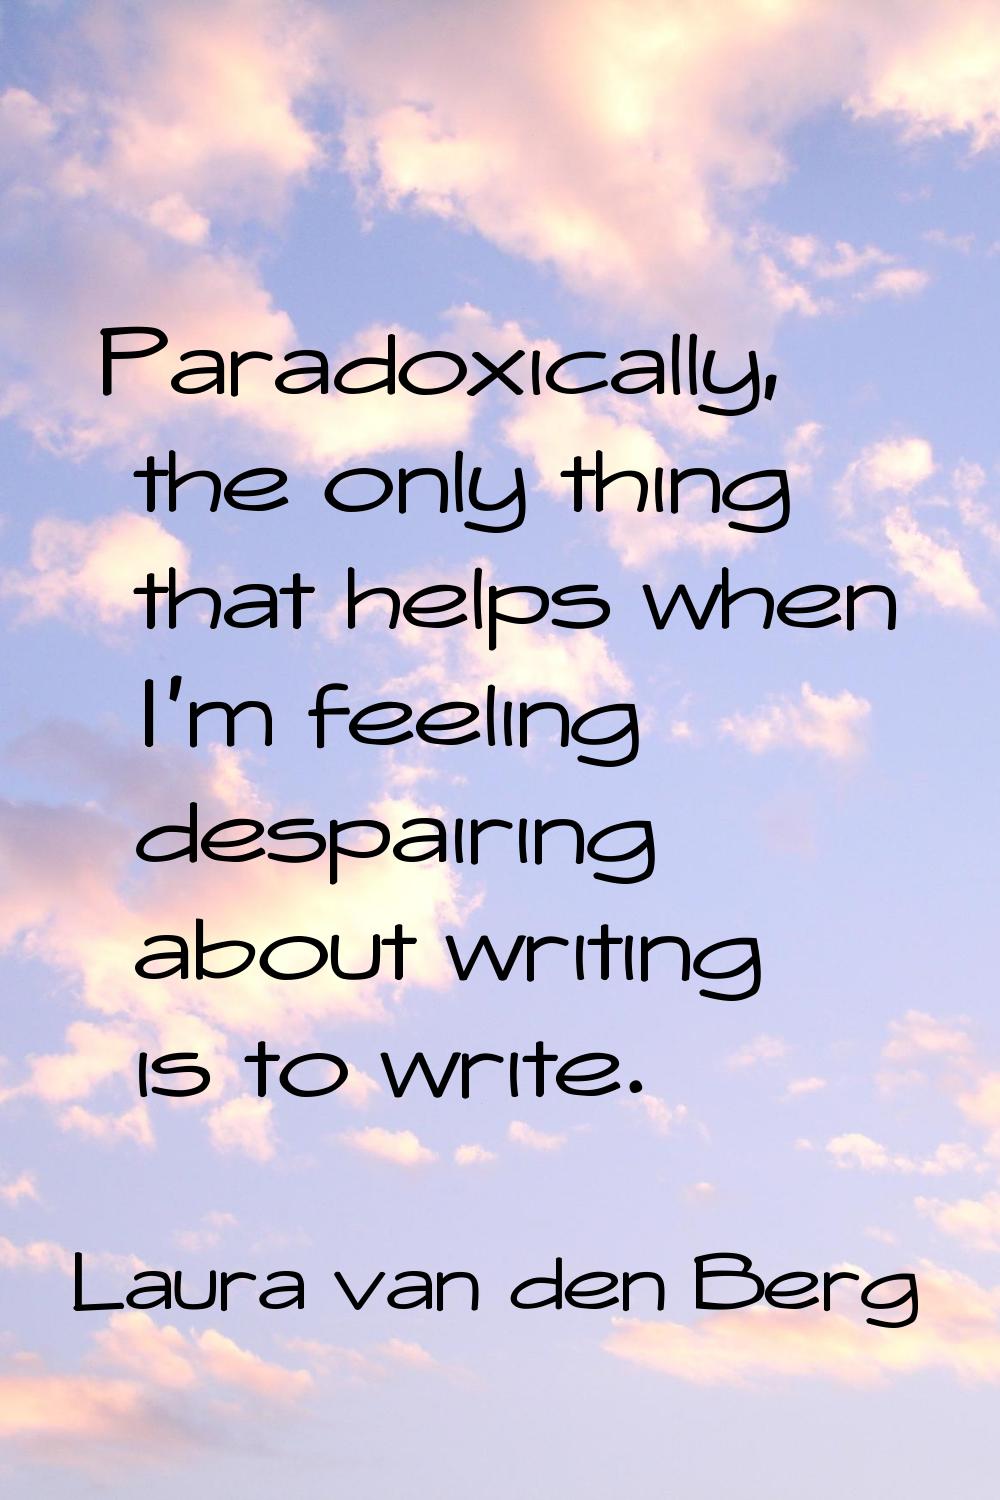 Paradoxically, the only thing that helps when I'm feeling despairing about writing is to write.